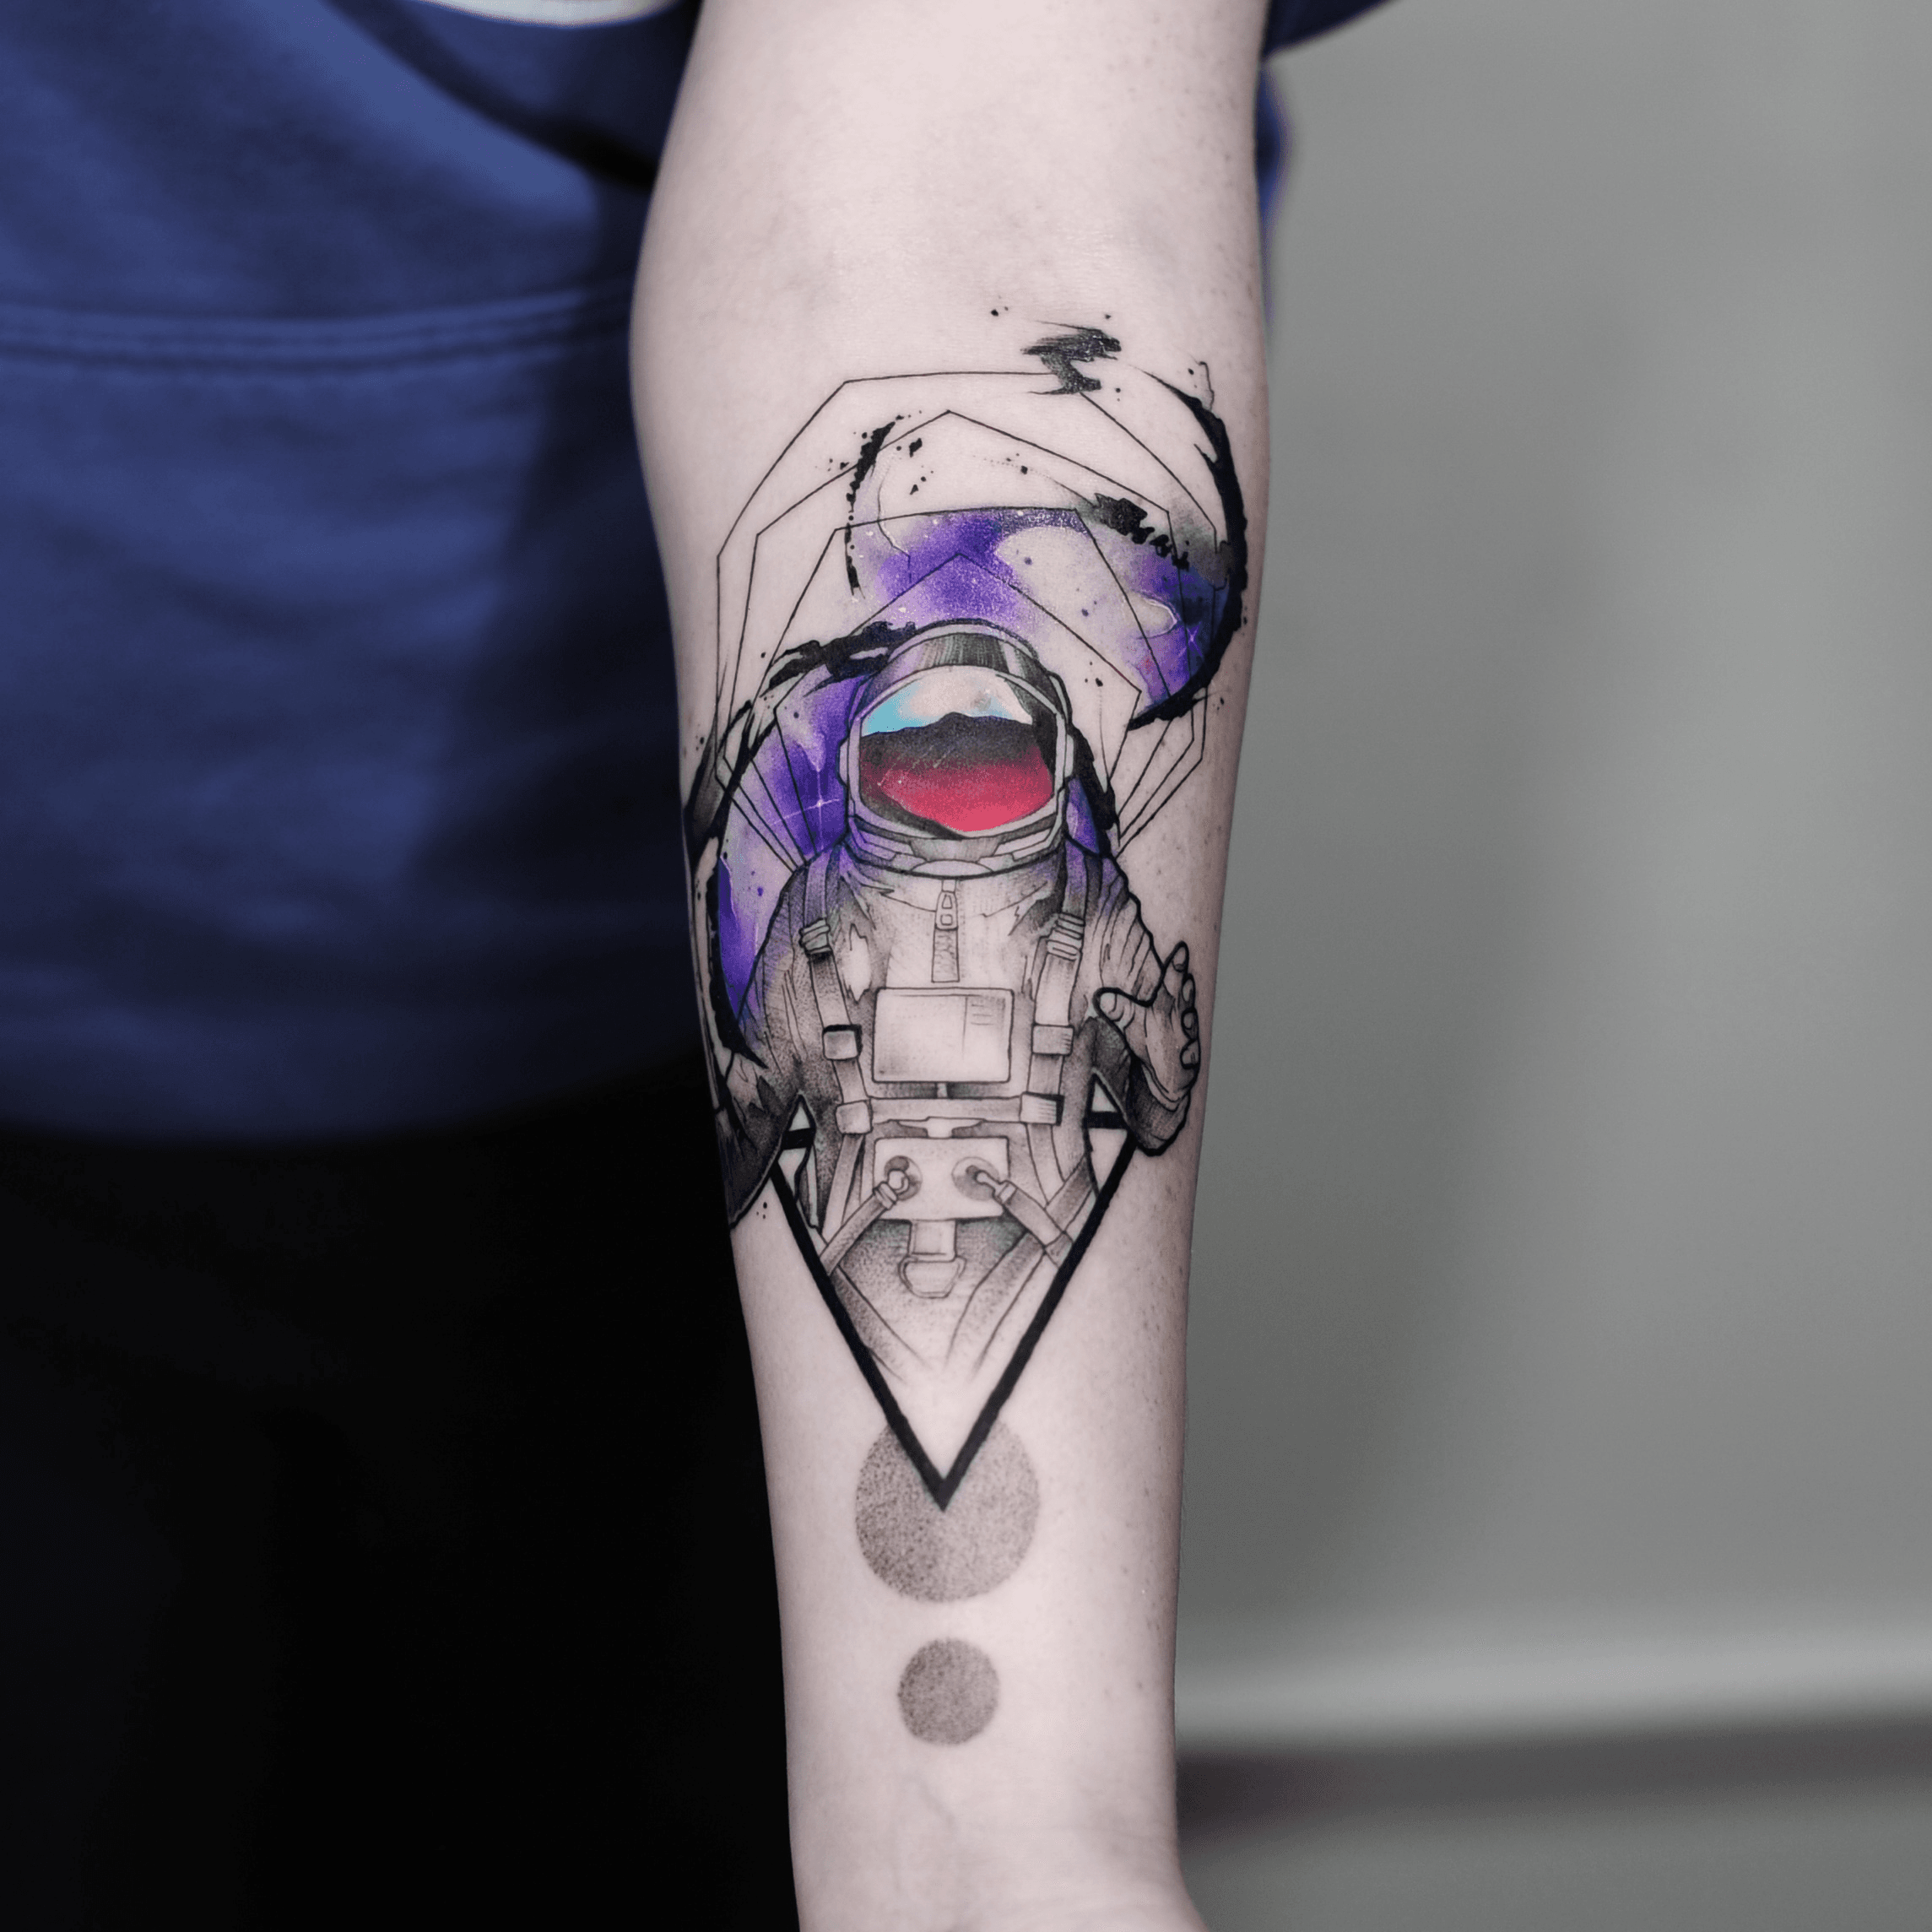 10 Best Galaxy Tattoo Ideas That Will Blow Your Mind   Daily Hind News